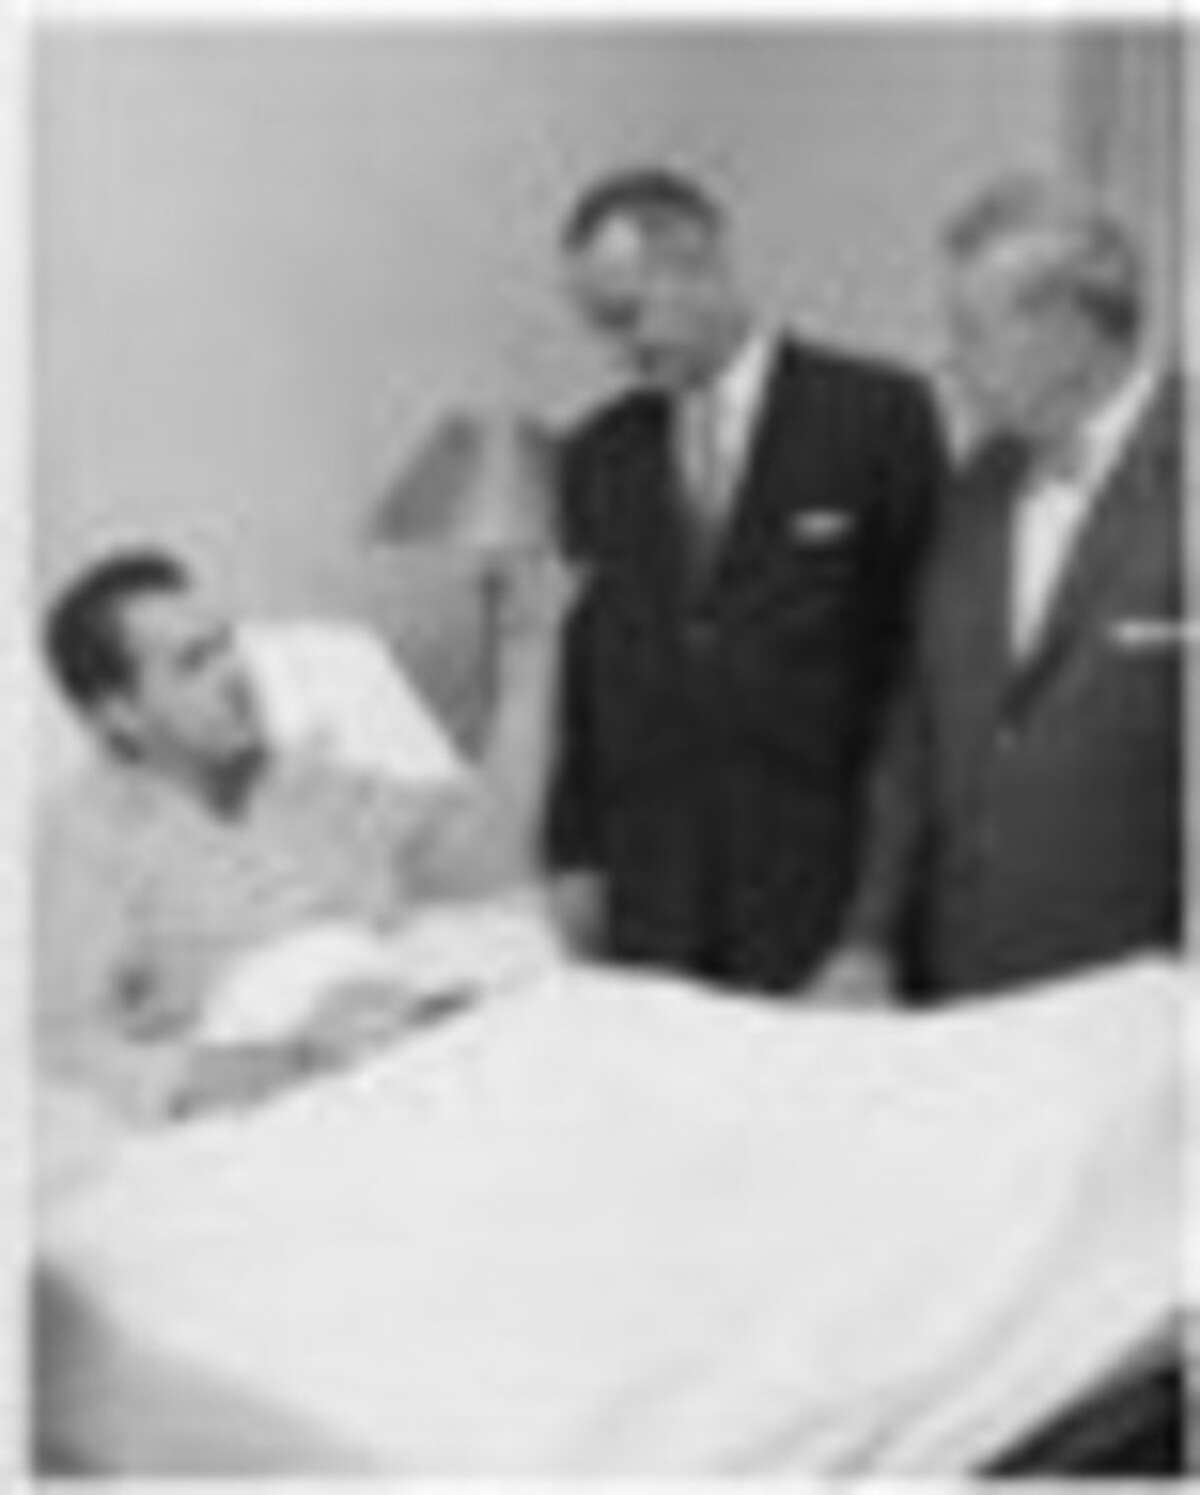 FILE - In this August 1960 file photo provided by Walter Reed Army Medical Center, Presidential candidate Richard M. Nixon is visited at Walter Reed Army Medical Center by Vice Presidential candidate Sen. Lyndon Johnson, Senator John Kennedy's running mate, and Senator Everett Dirksen. Nixon spent two weeks at Walter Reed recovering from a bacterial staph infection. (AP Photo/Walter Reed Army Medical Center, ho)